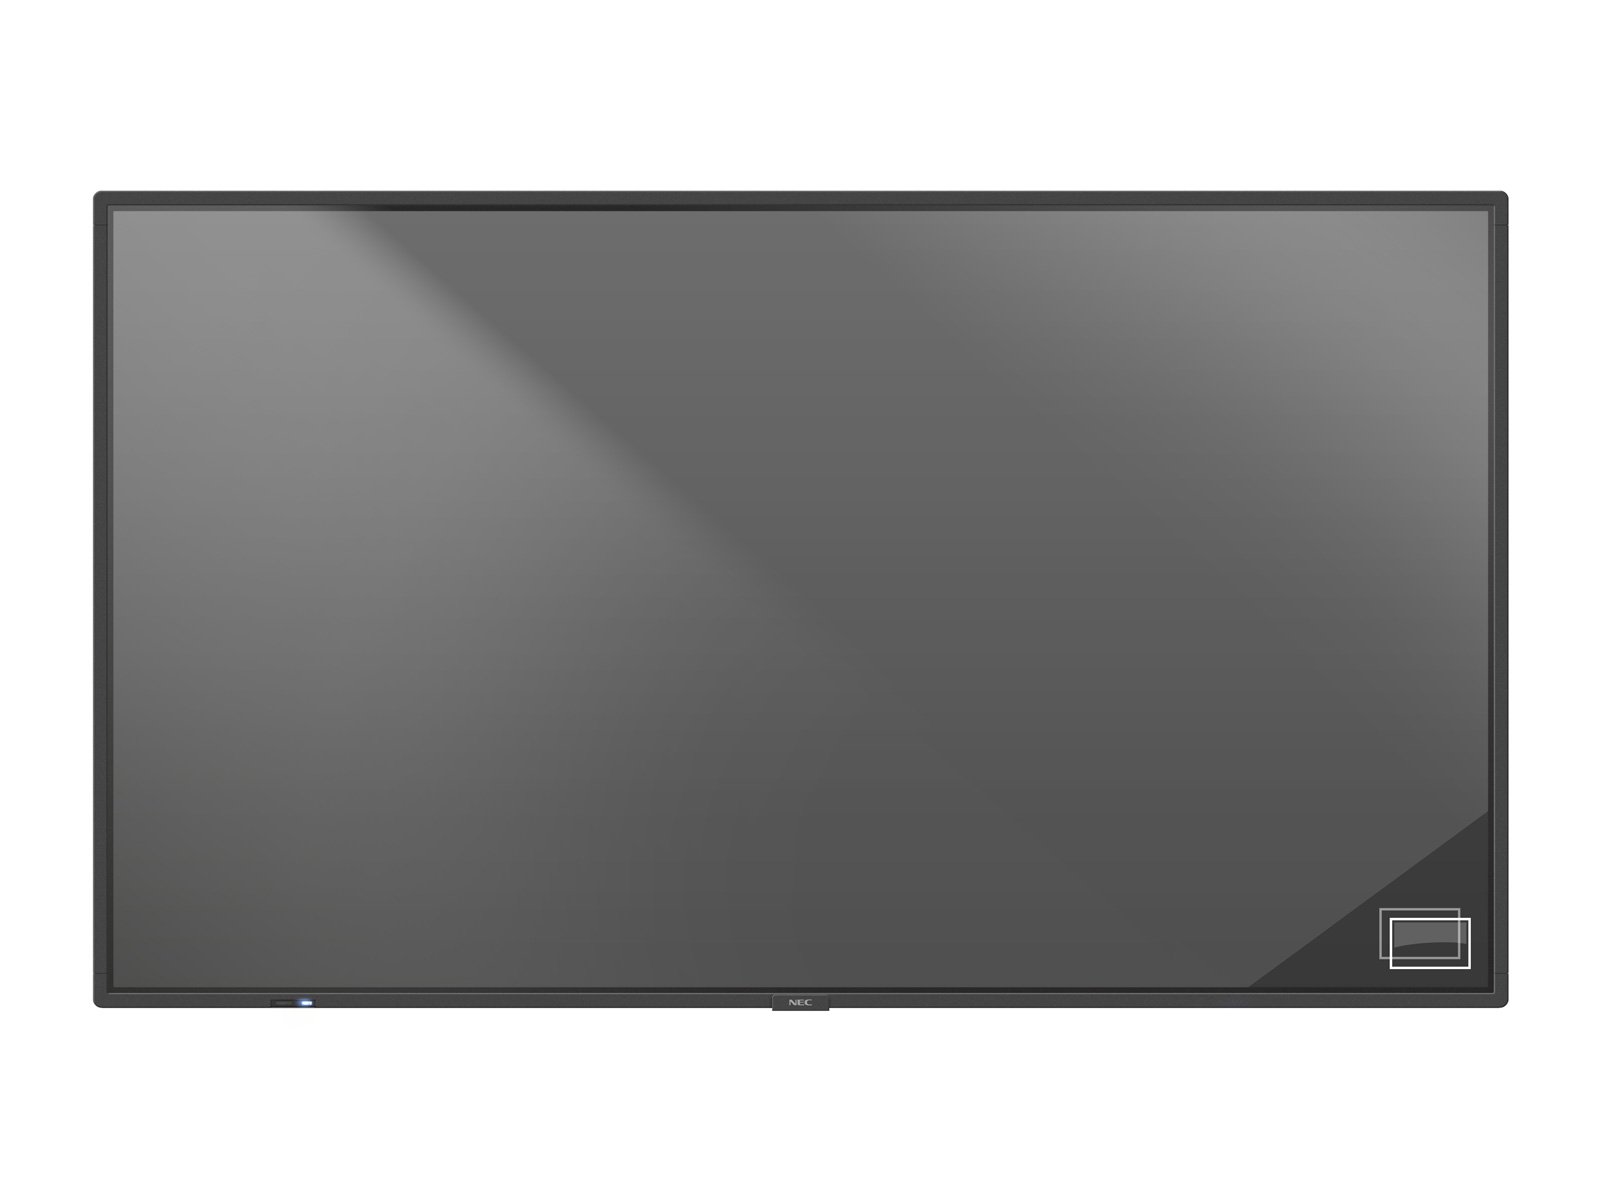 NEC MultiSync P555 PG - 55 inch - 700 cd/m² - Ultra-HD - 3840x2160 pixel - 24/7 - with protection glass - Large Format Display